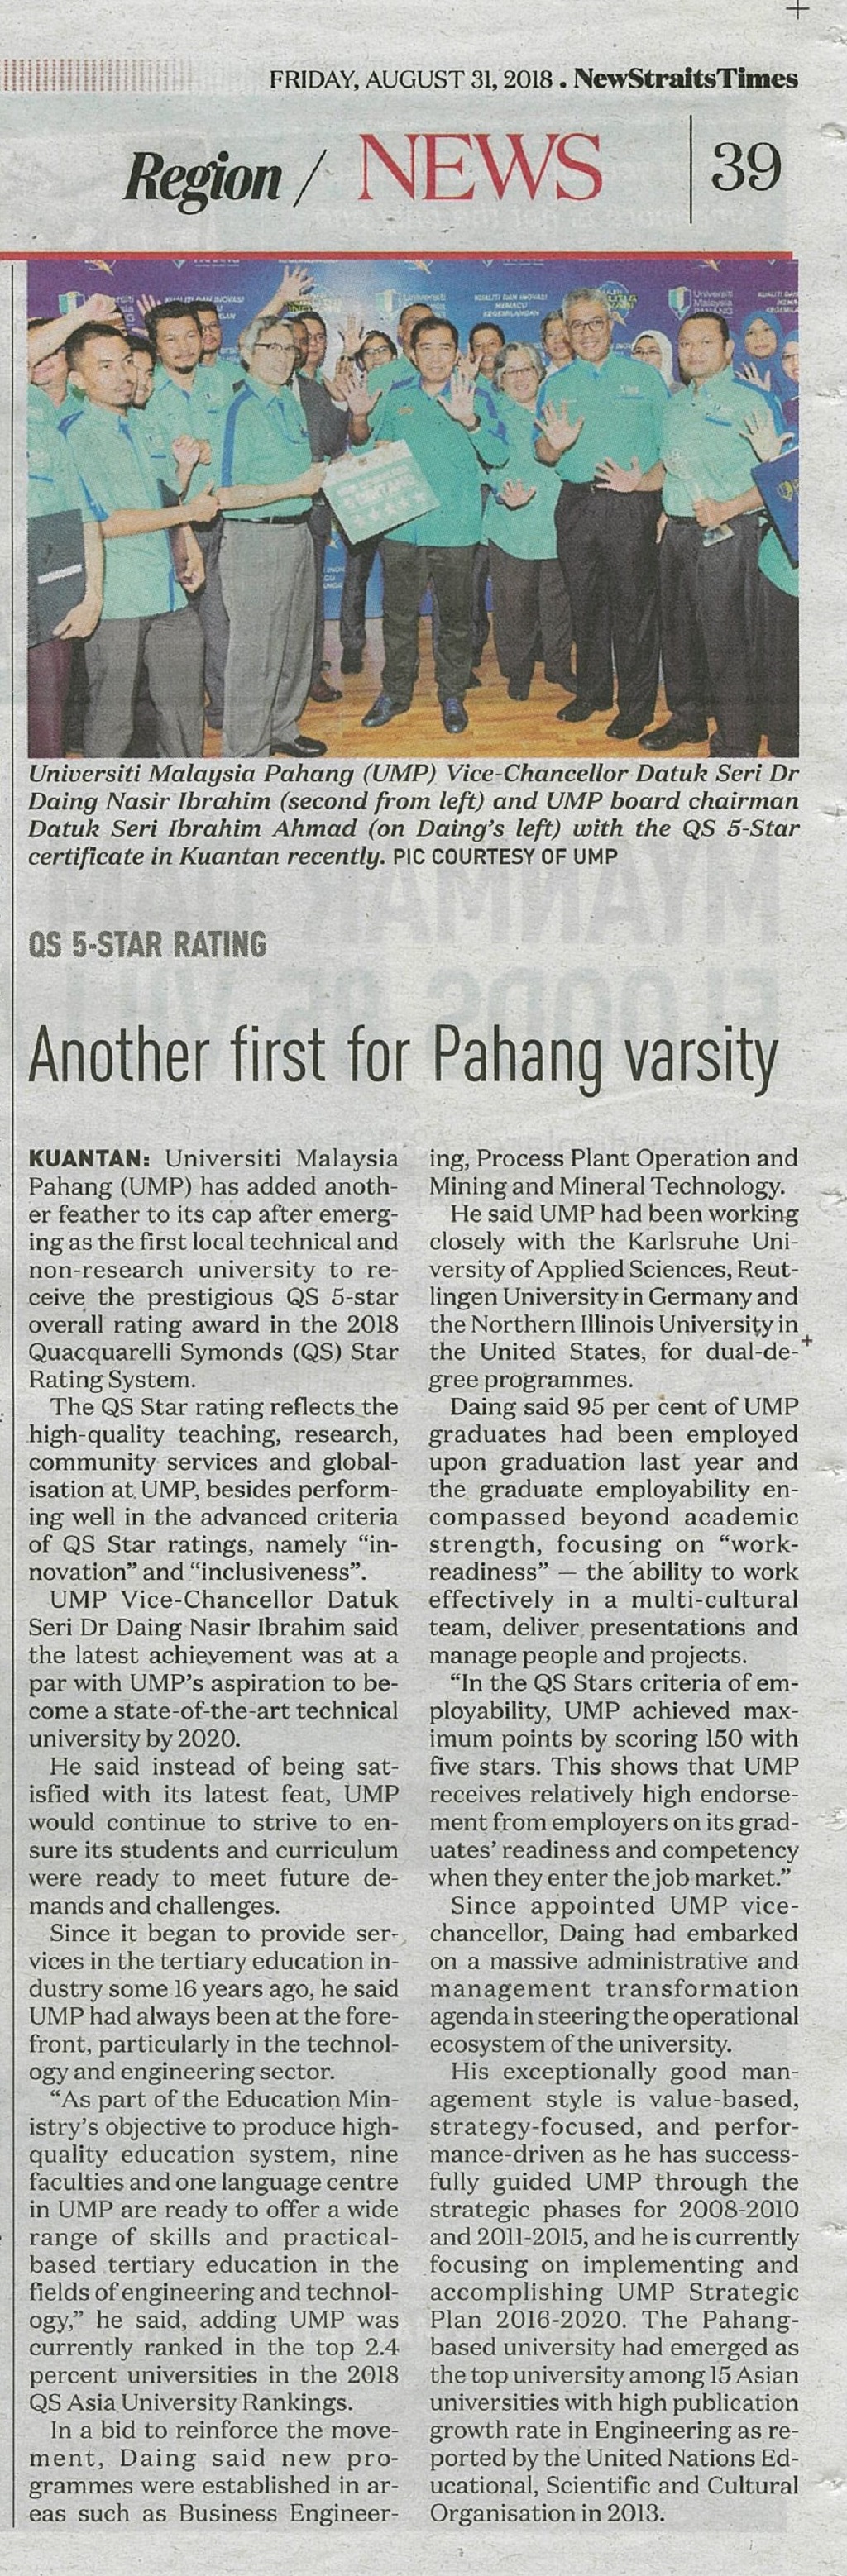 Another first for Pahang varsity